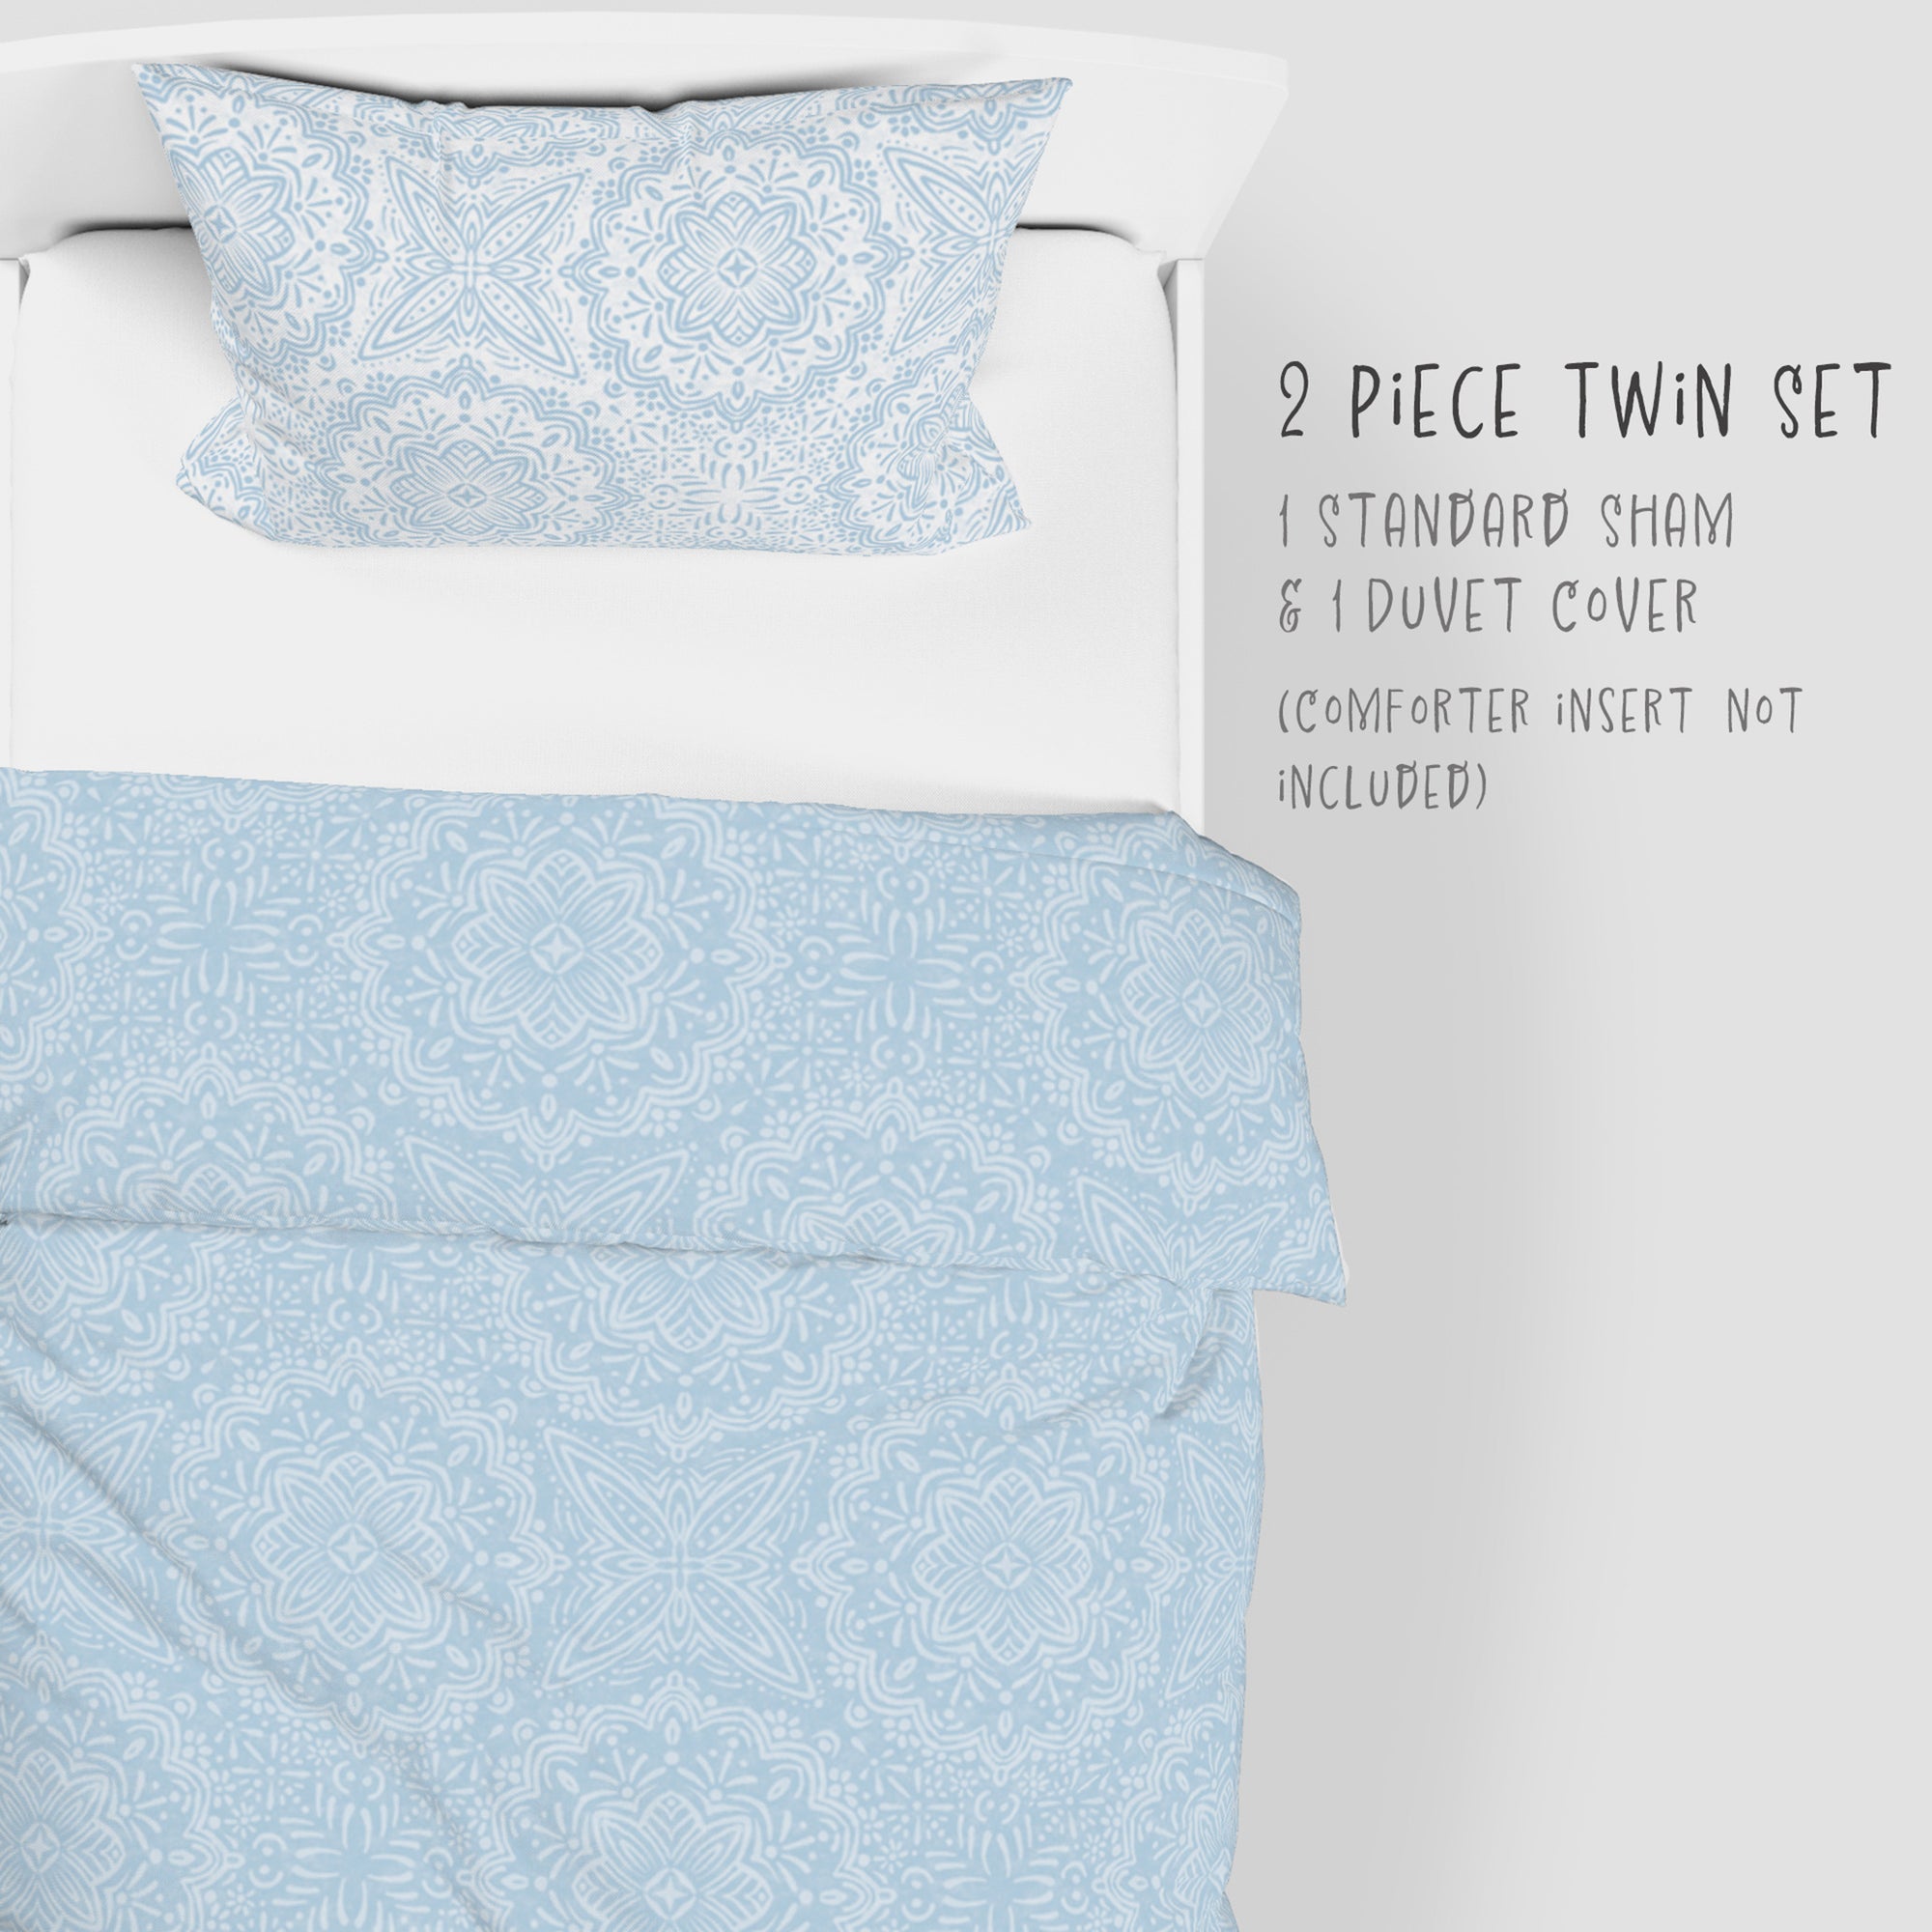  2 Piece Set for Twin sizes - Mandala Blue Boho Bliss Cotton Bedding comes with Duvet cover and one Sham